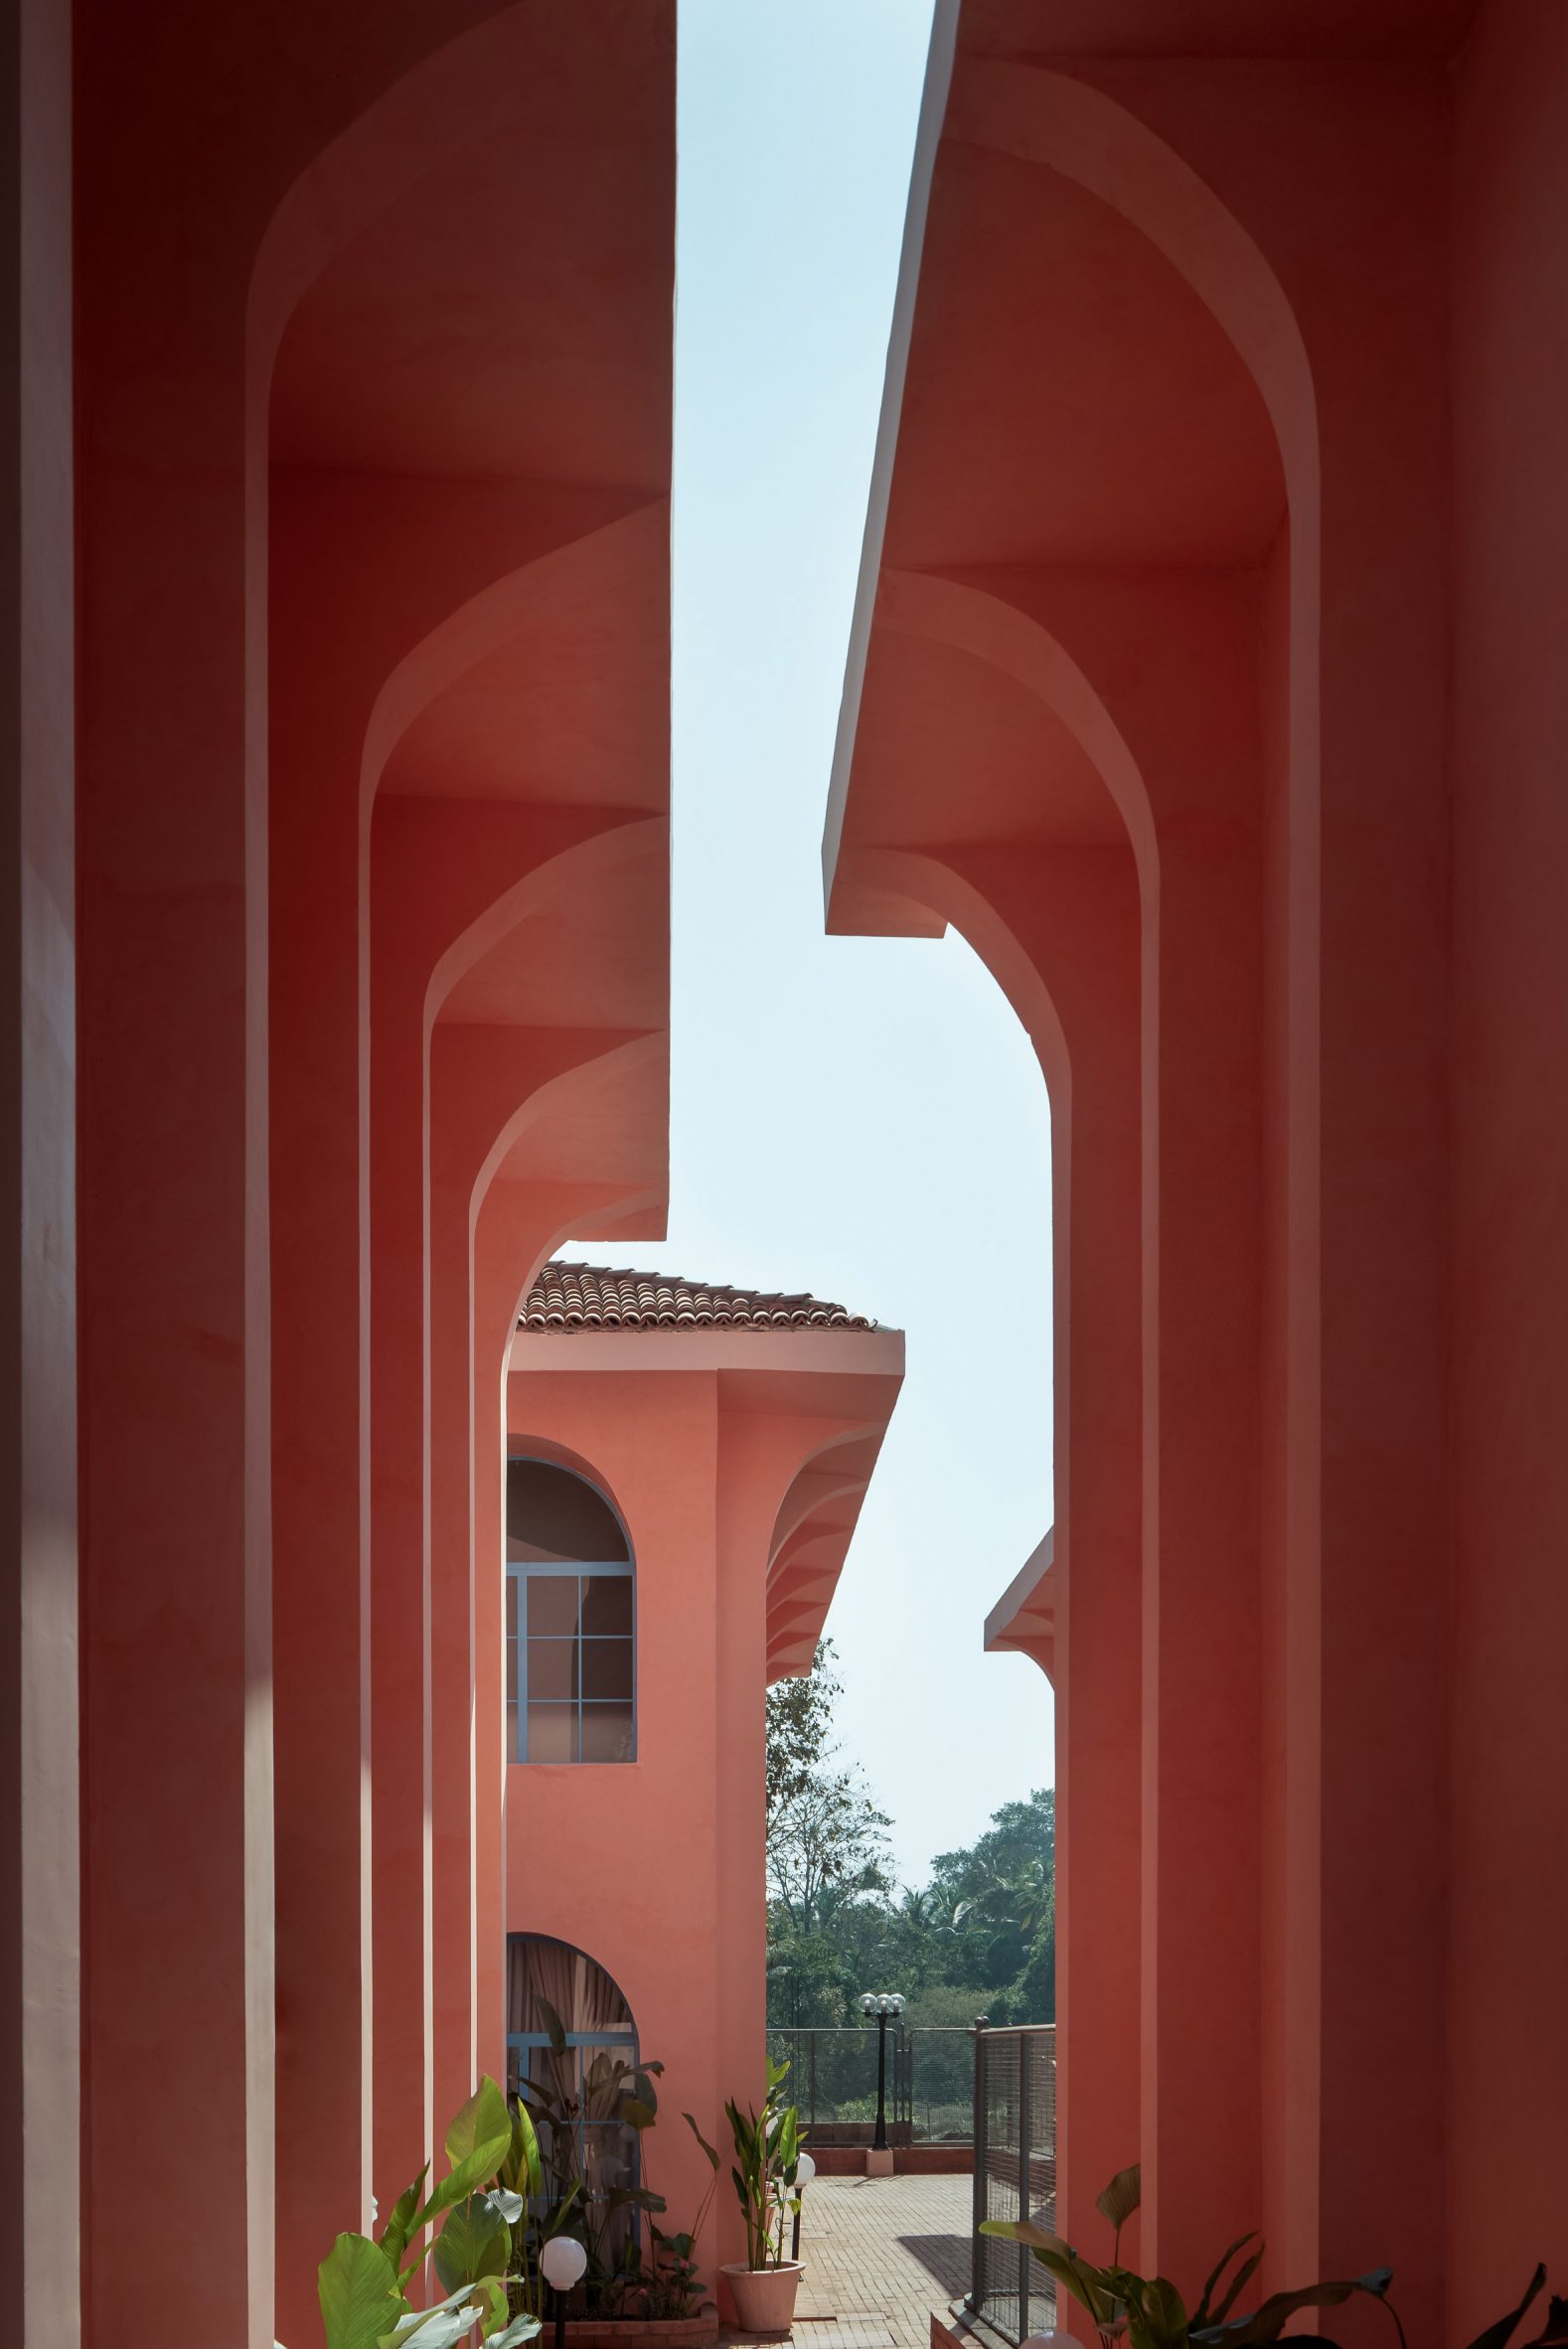 Pink Baia Villas in India by Jugal Mistri Architects